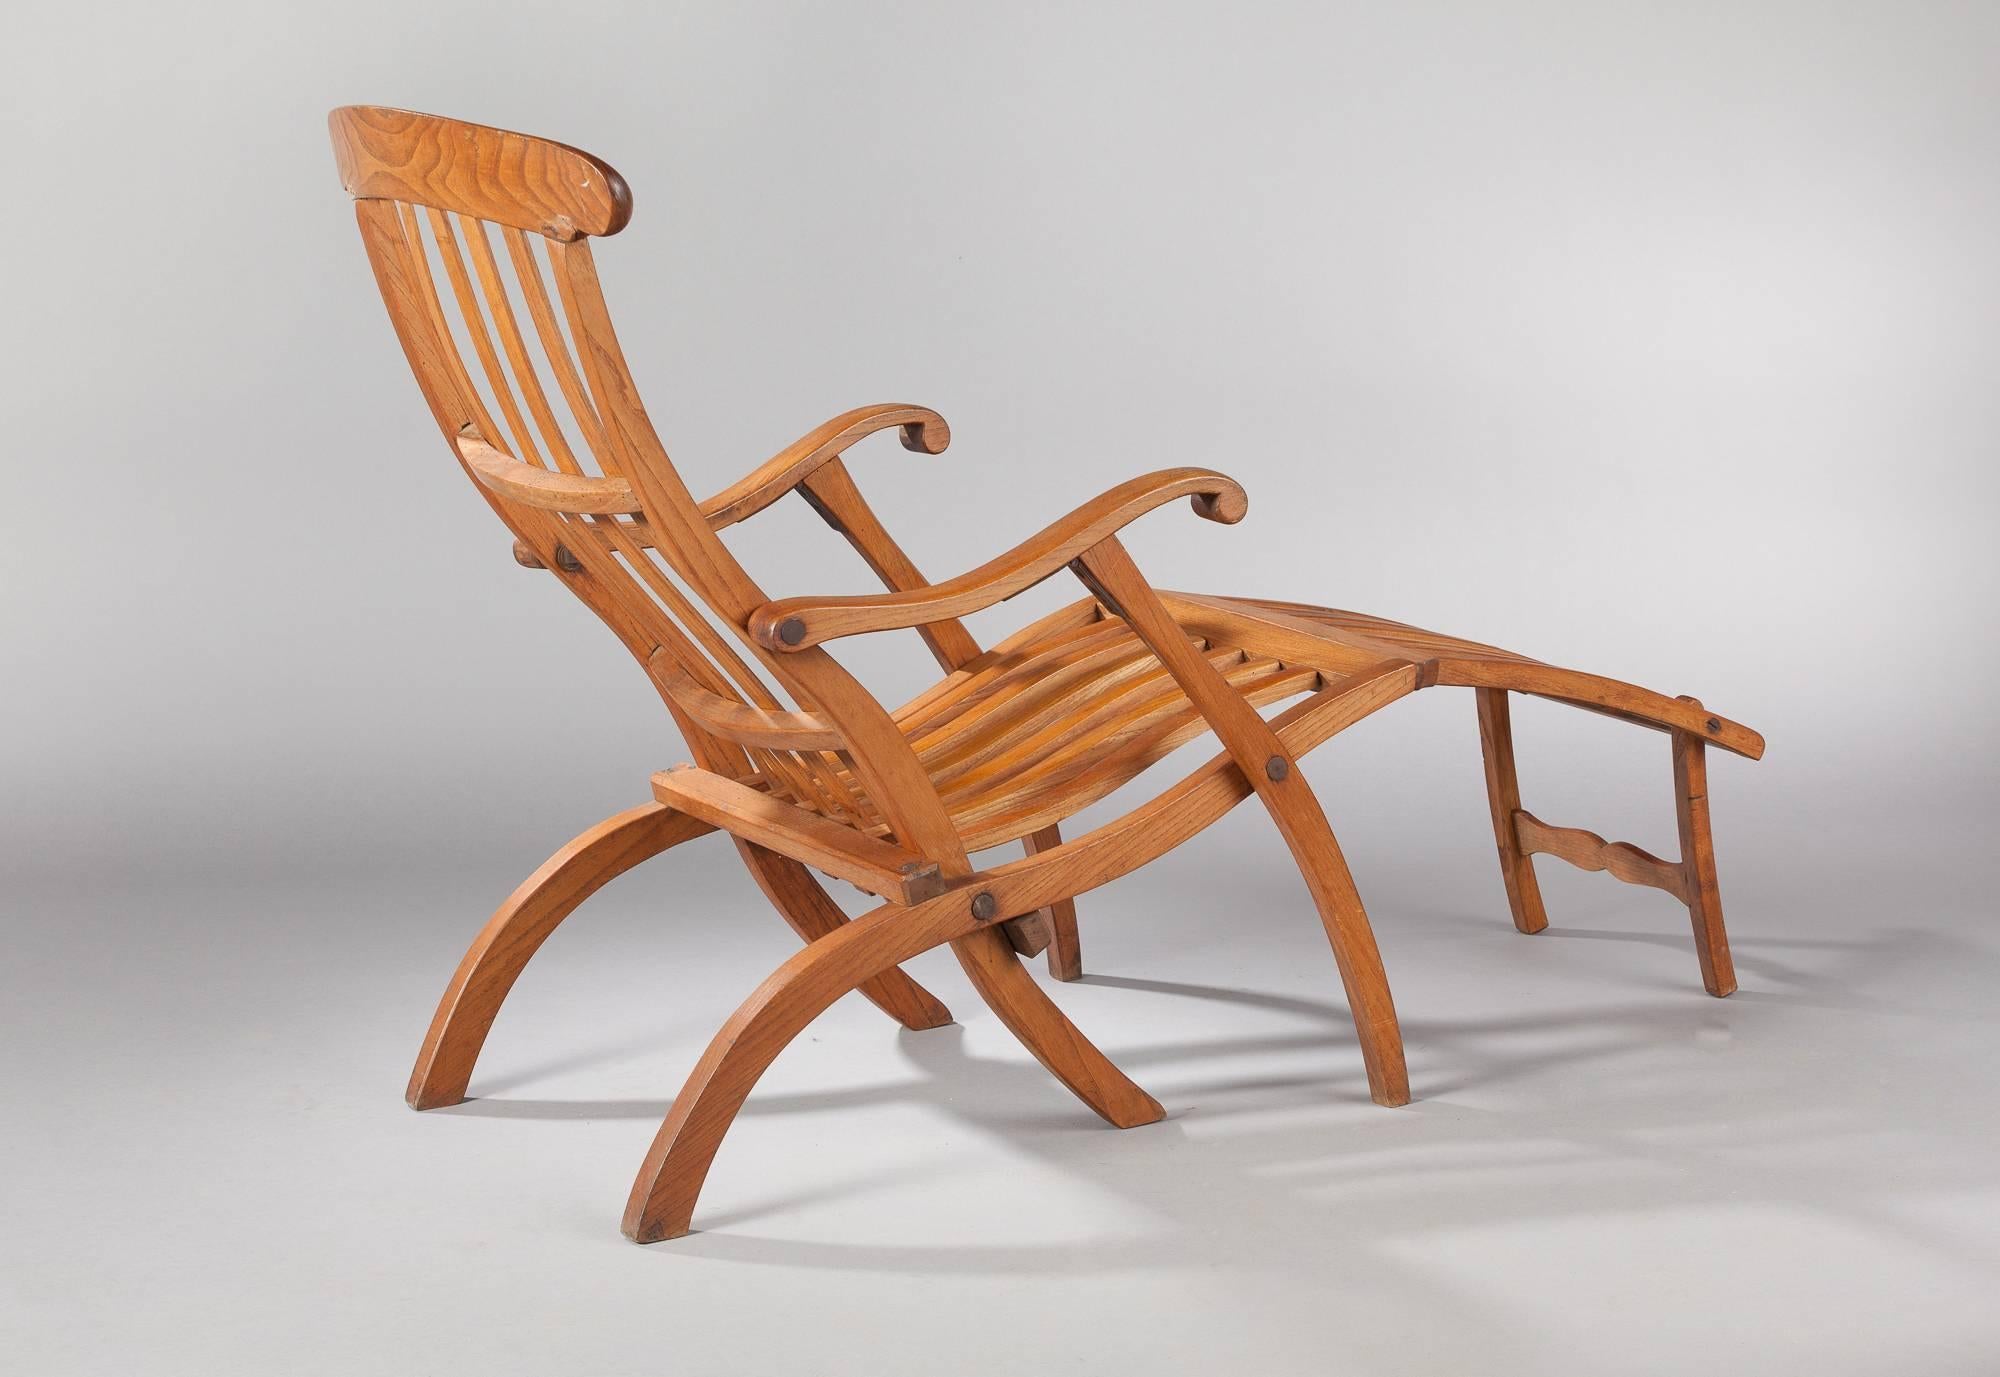 An elegant Art Deco teak wood lounge chair named "Transat" which came from a French ocean liner. You can see similar chairs standing on liner decks in retro photos.